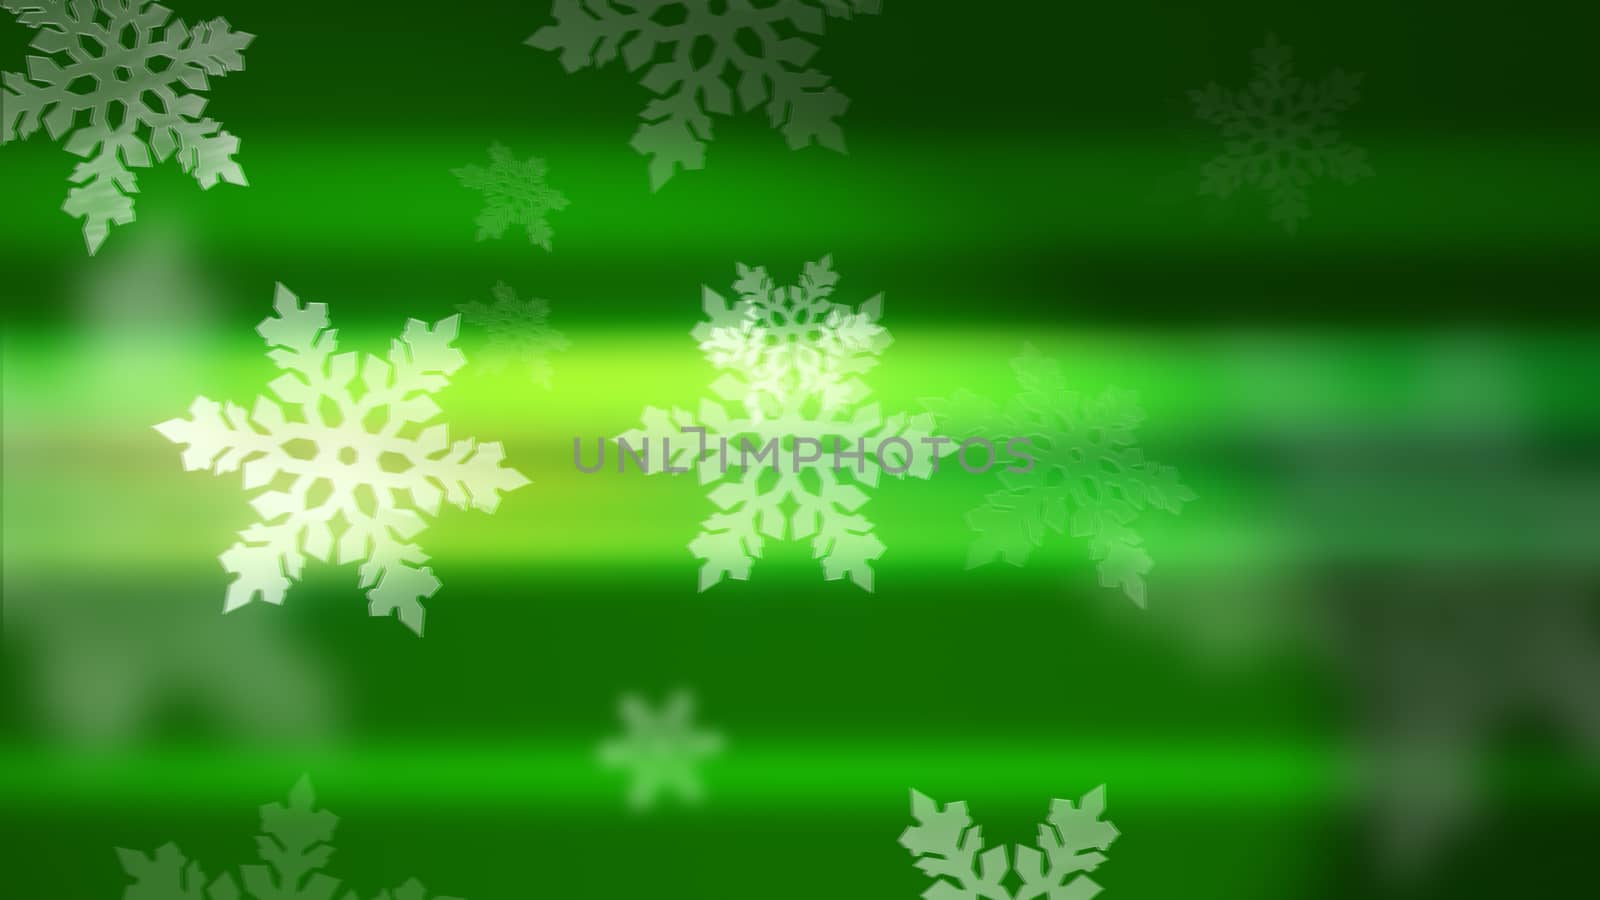 Merry Christmas and Happy New Year background. Snowflakes on the green background. 